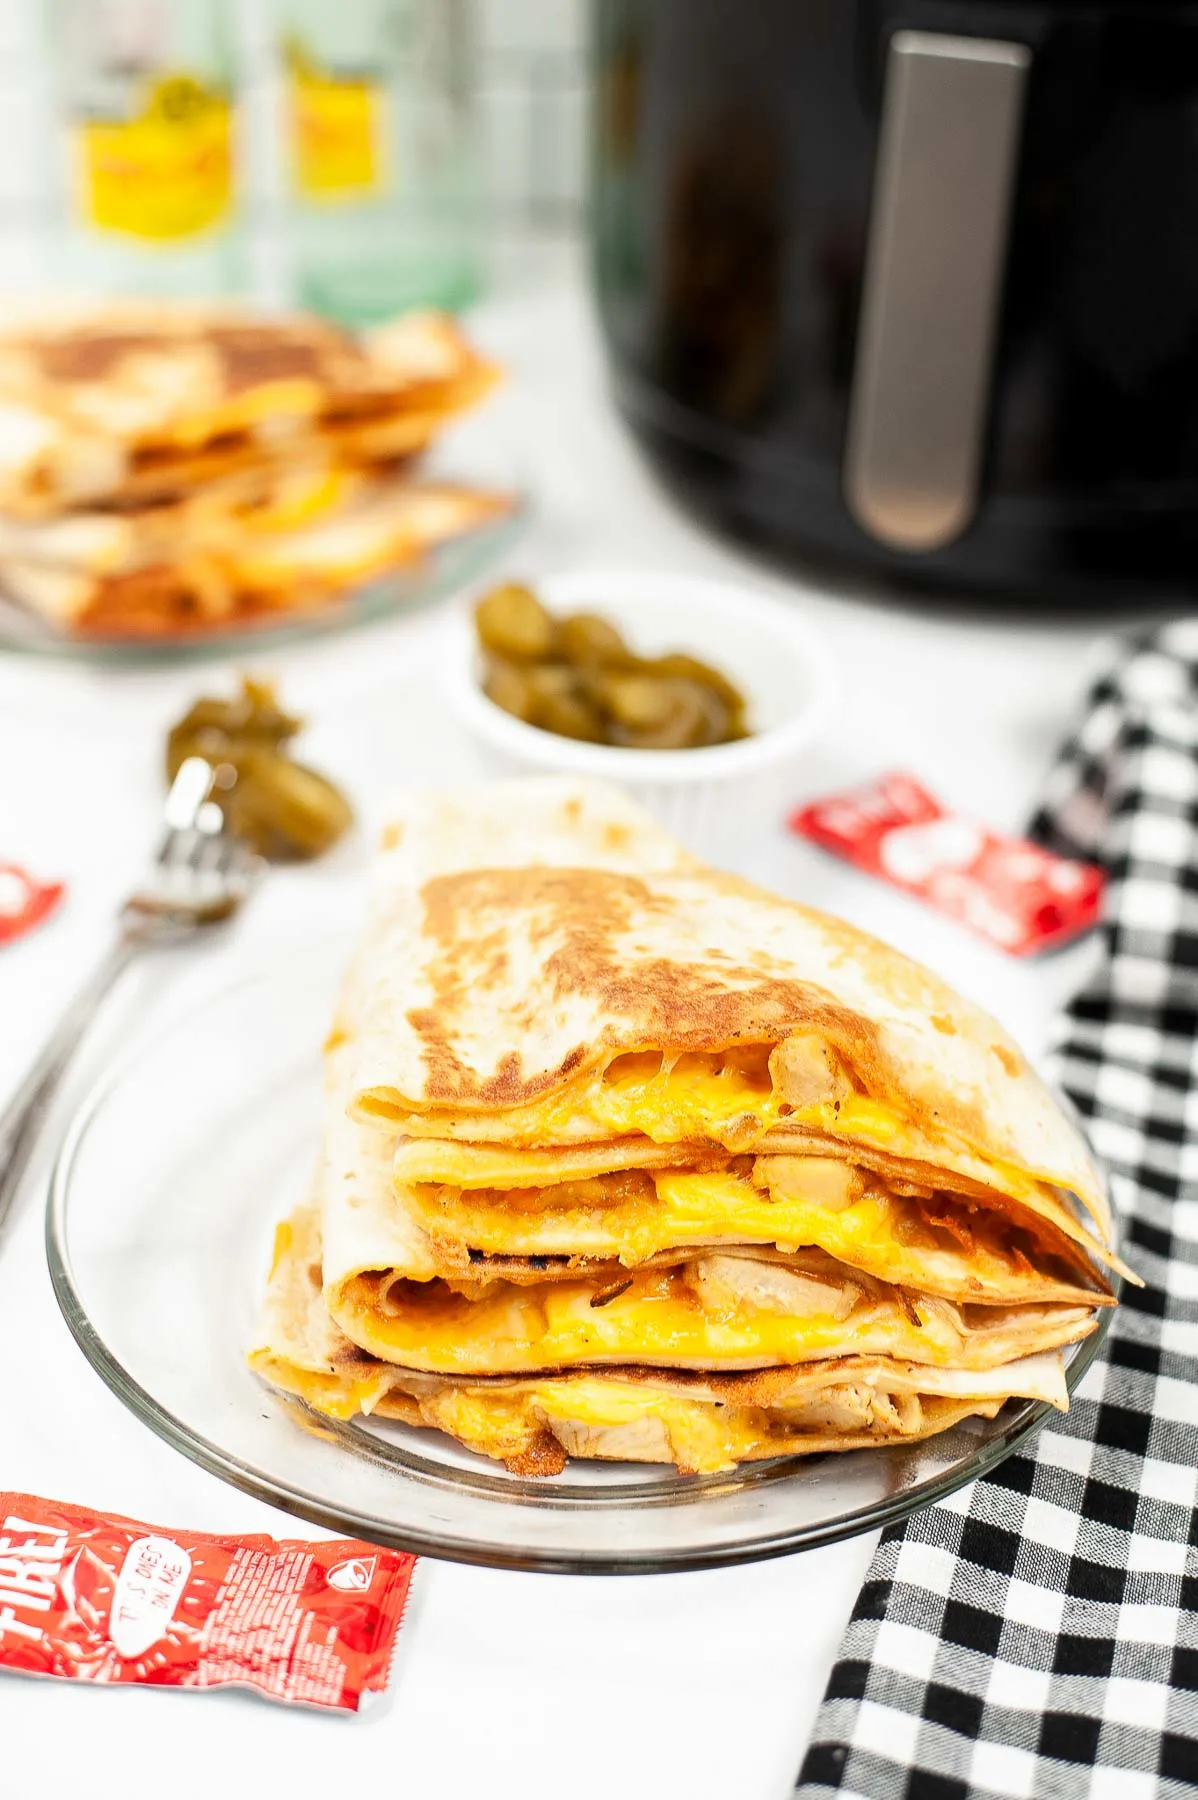 Taco bell chicken quesadilla on a plate next to air fryer and garnish.